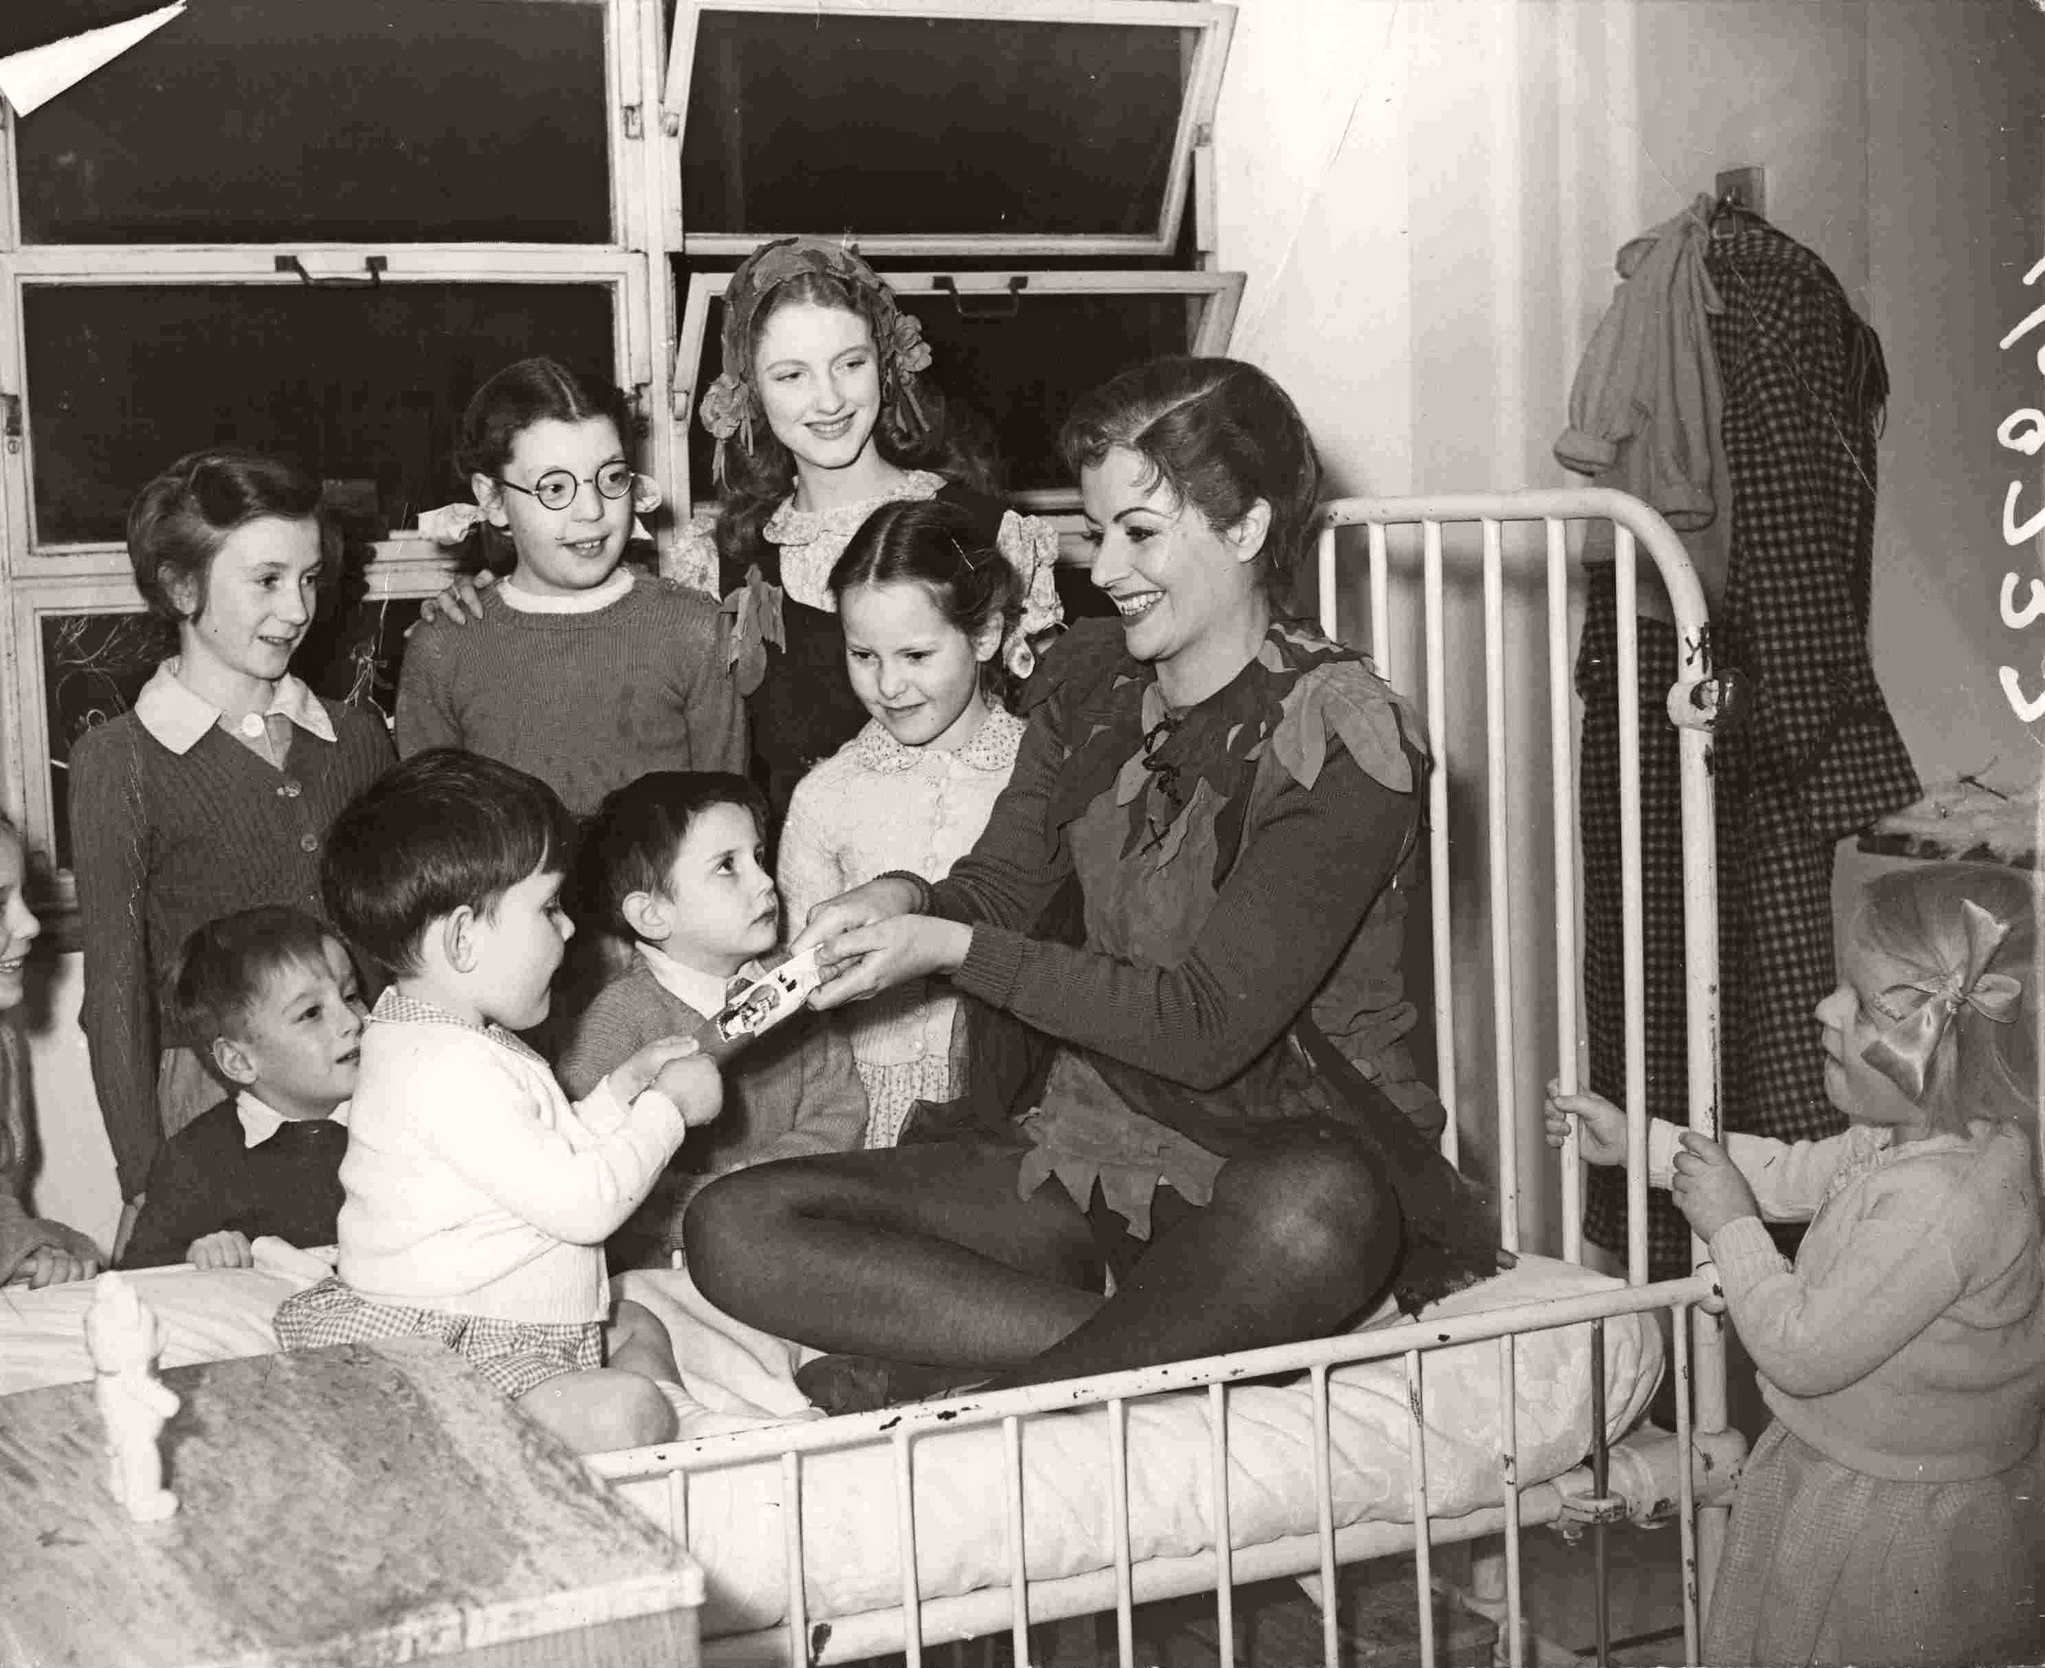 Margaret Lockwood, in costume as Peter Pan, perches on a bed in the ward and laughs as she pulls a Christmas cracker and plays with the children at London’s Great Ormond Street Hospital in 1949